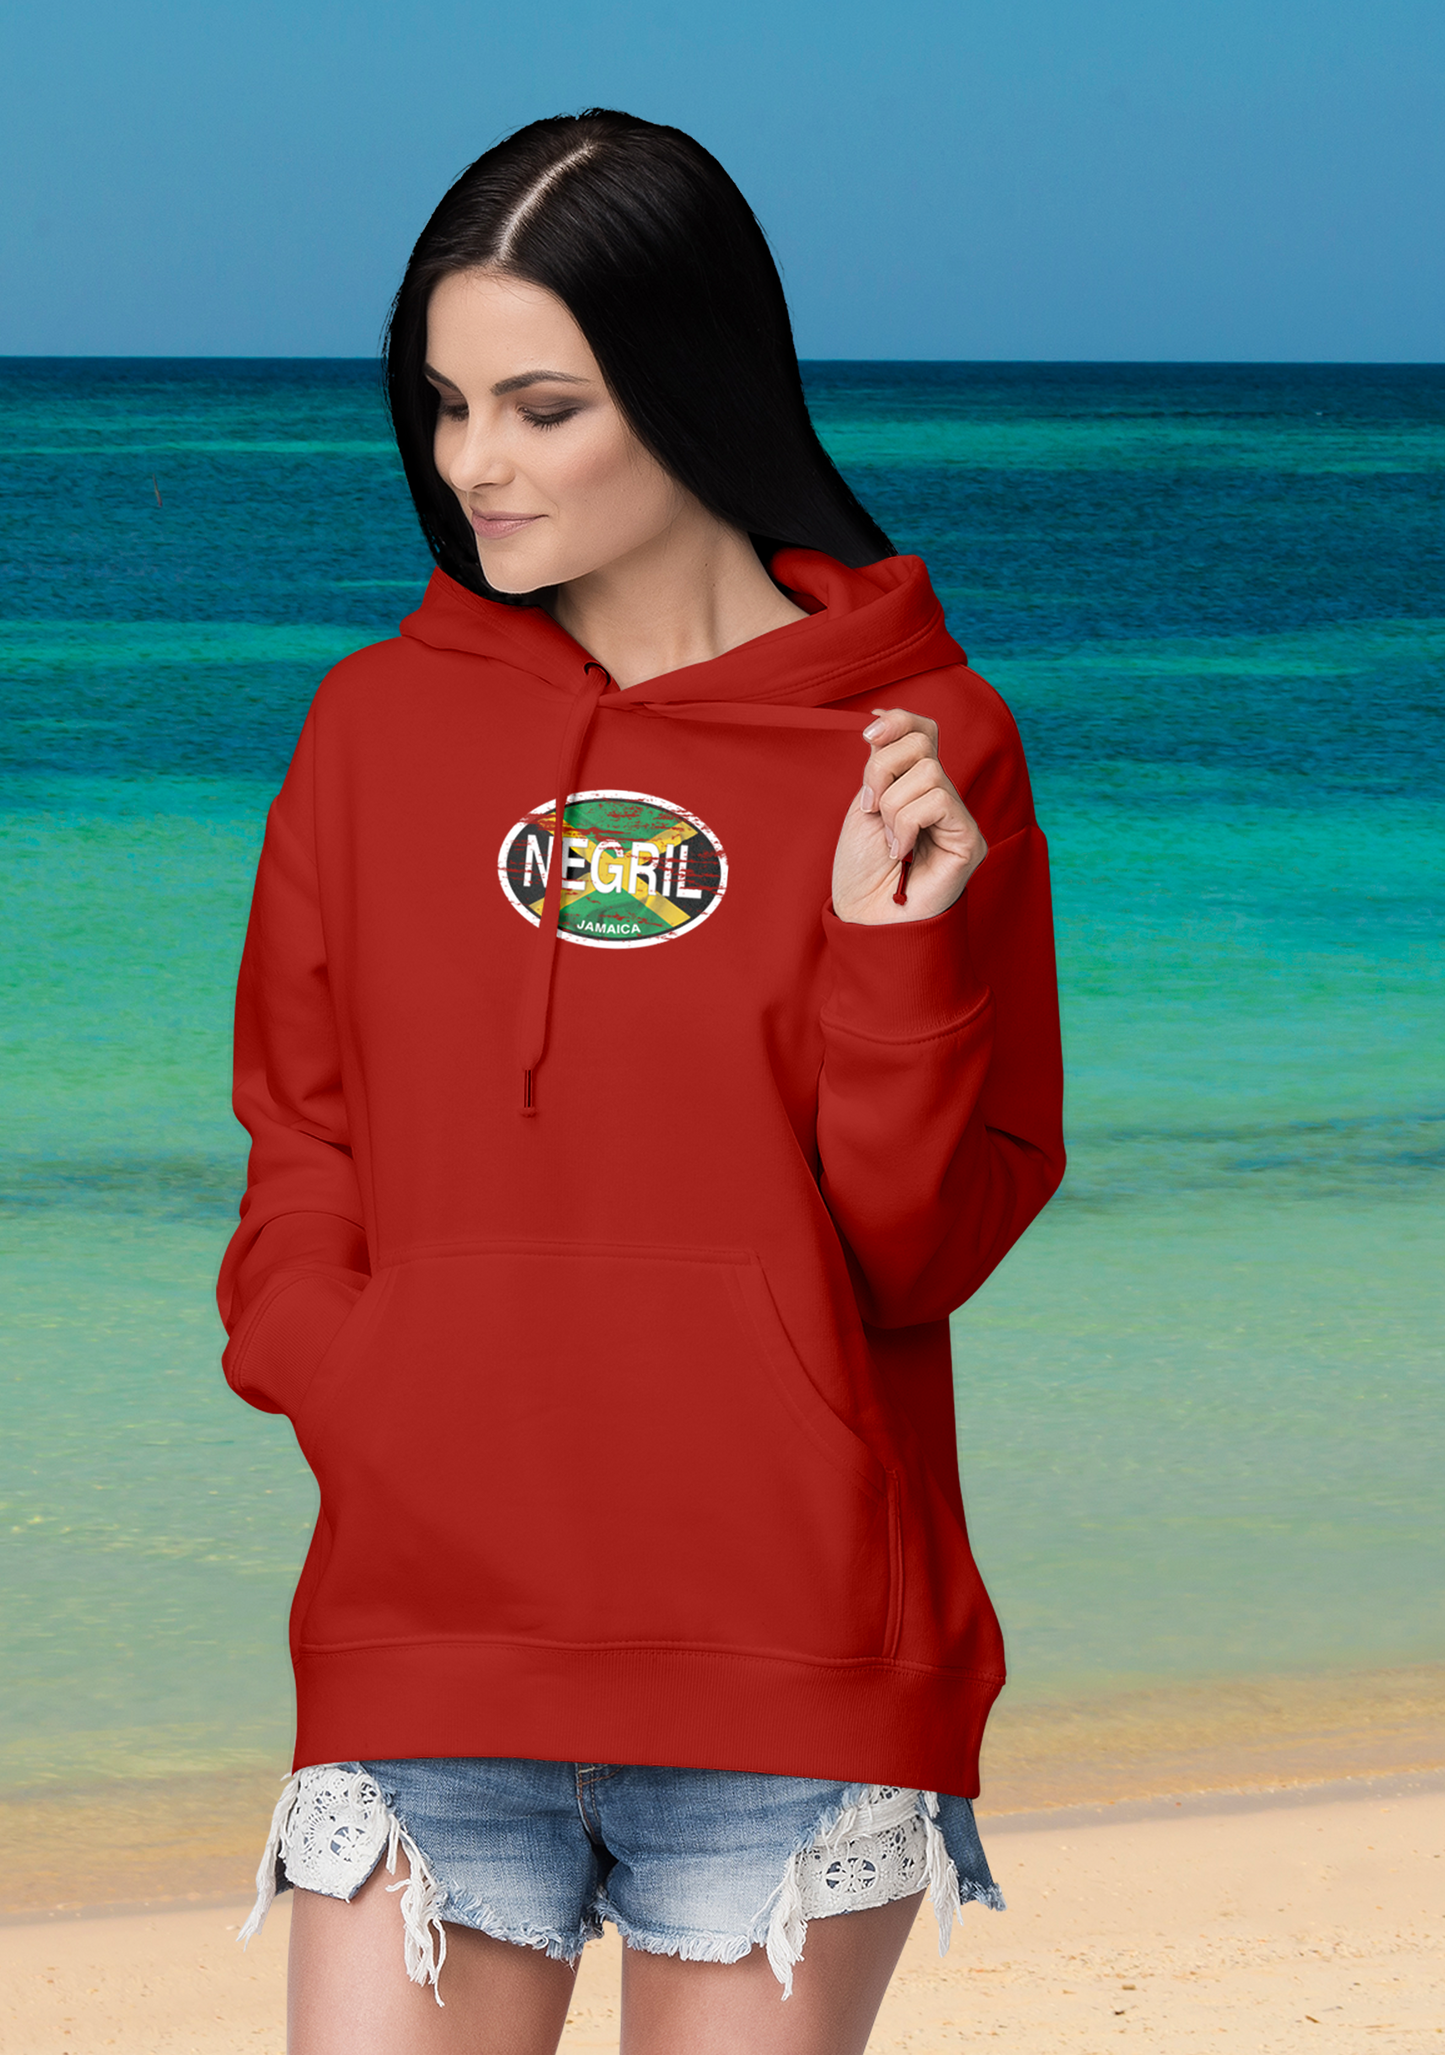 Negril Men's and Women's Flag Adult Hoodie - My Destination Location